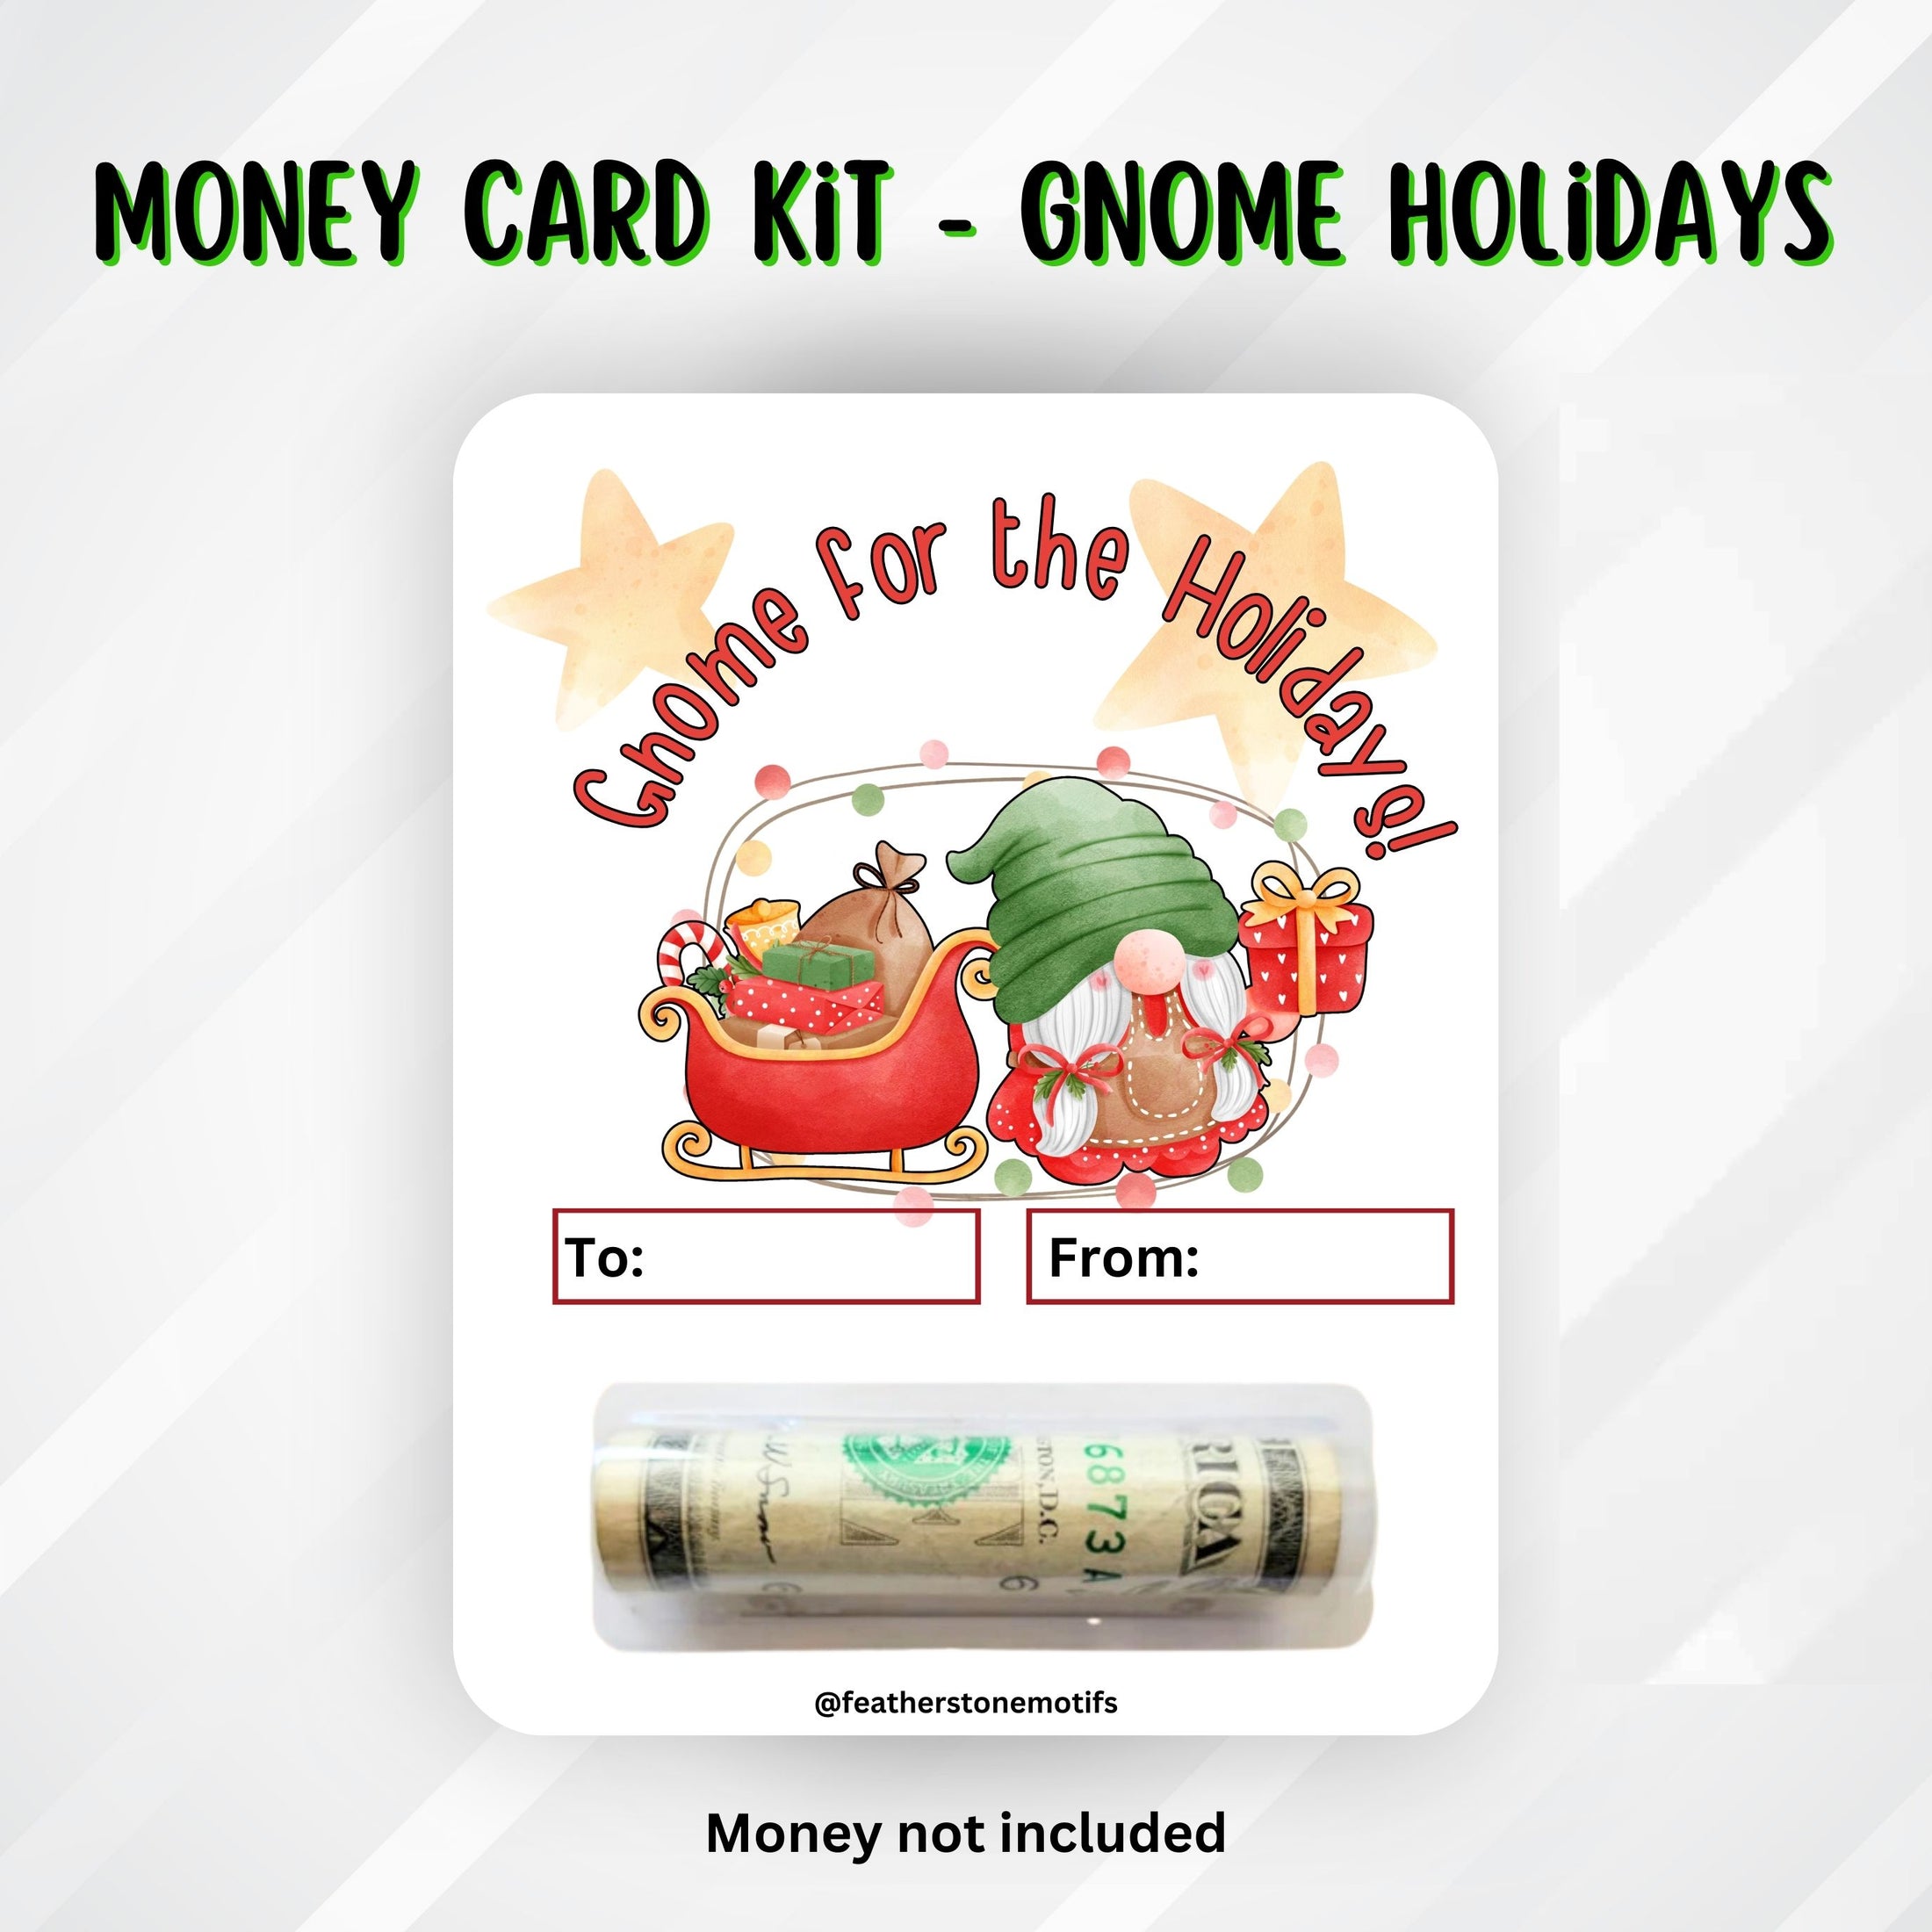 This image shows the Gnome for the Holidays money card with money tube attached.